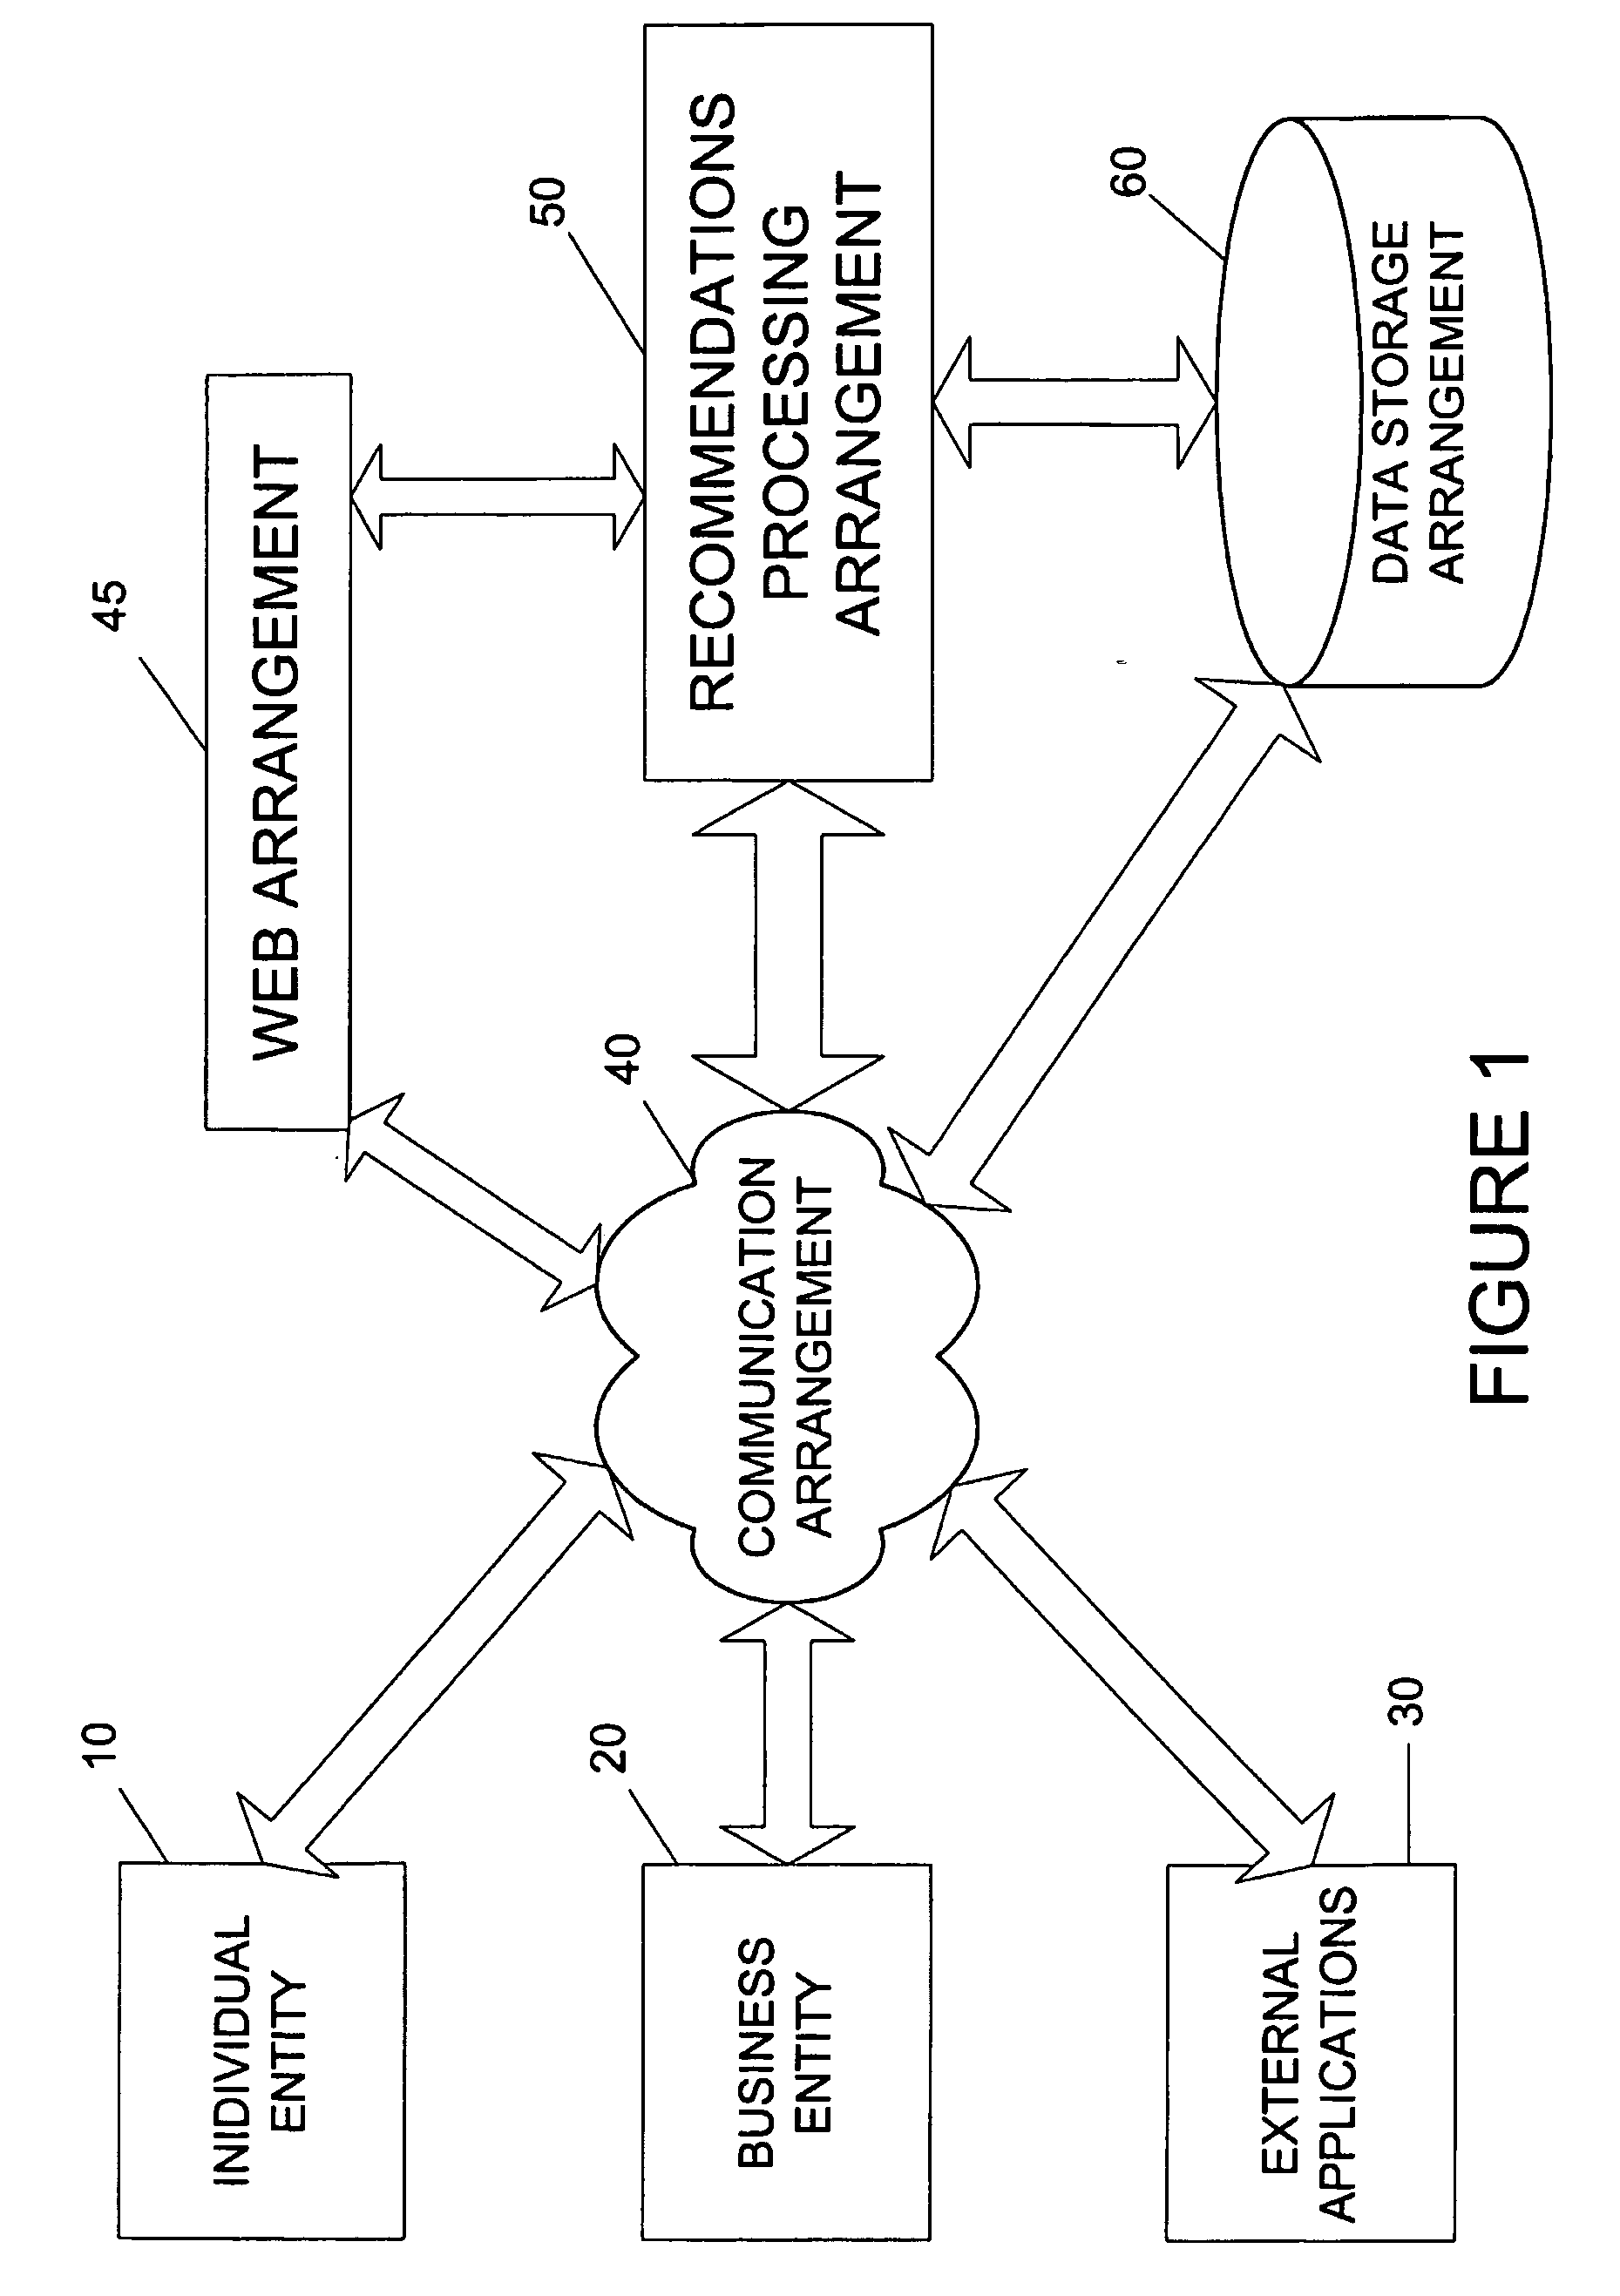 System, process and software arrangement for providing multidimensional recommendations/suggestions